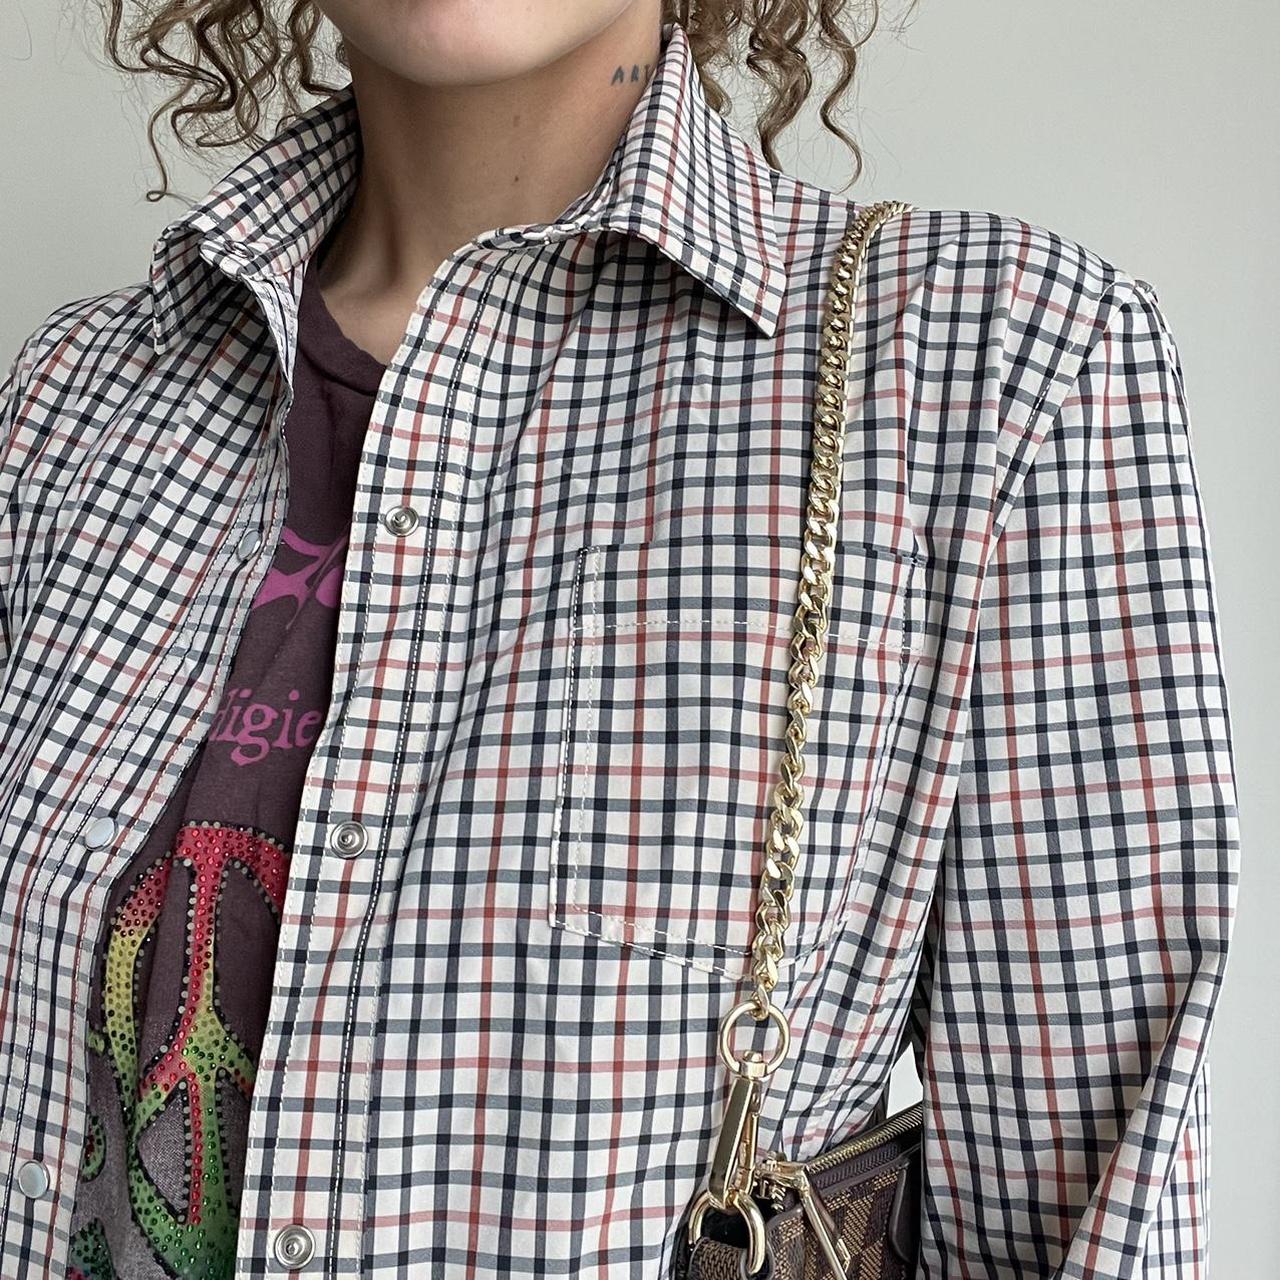 Product Image 3 - Super cute checkered shirt! Looks